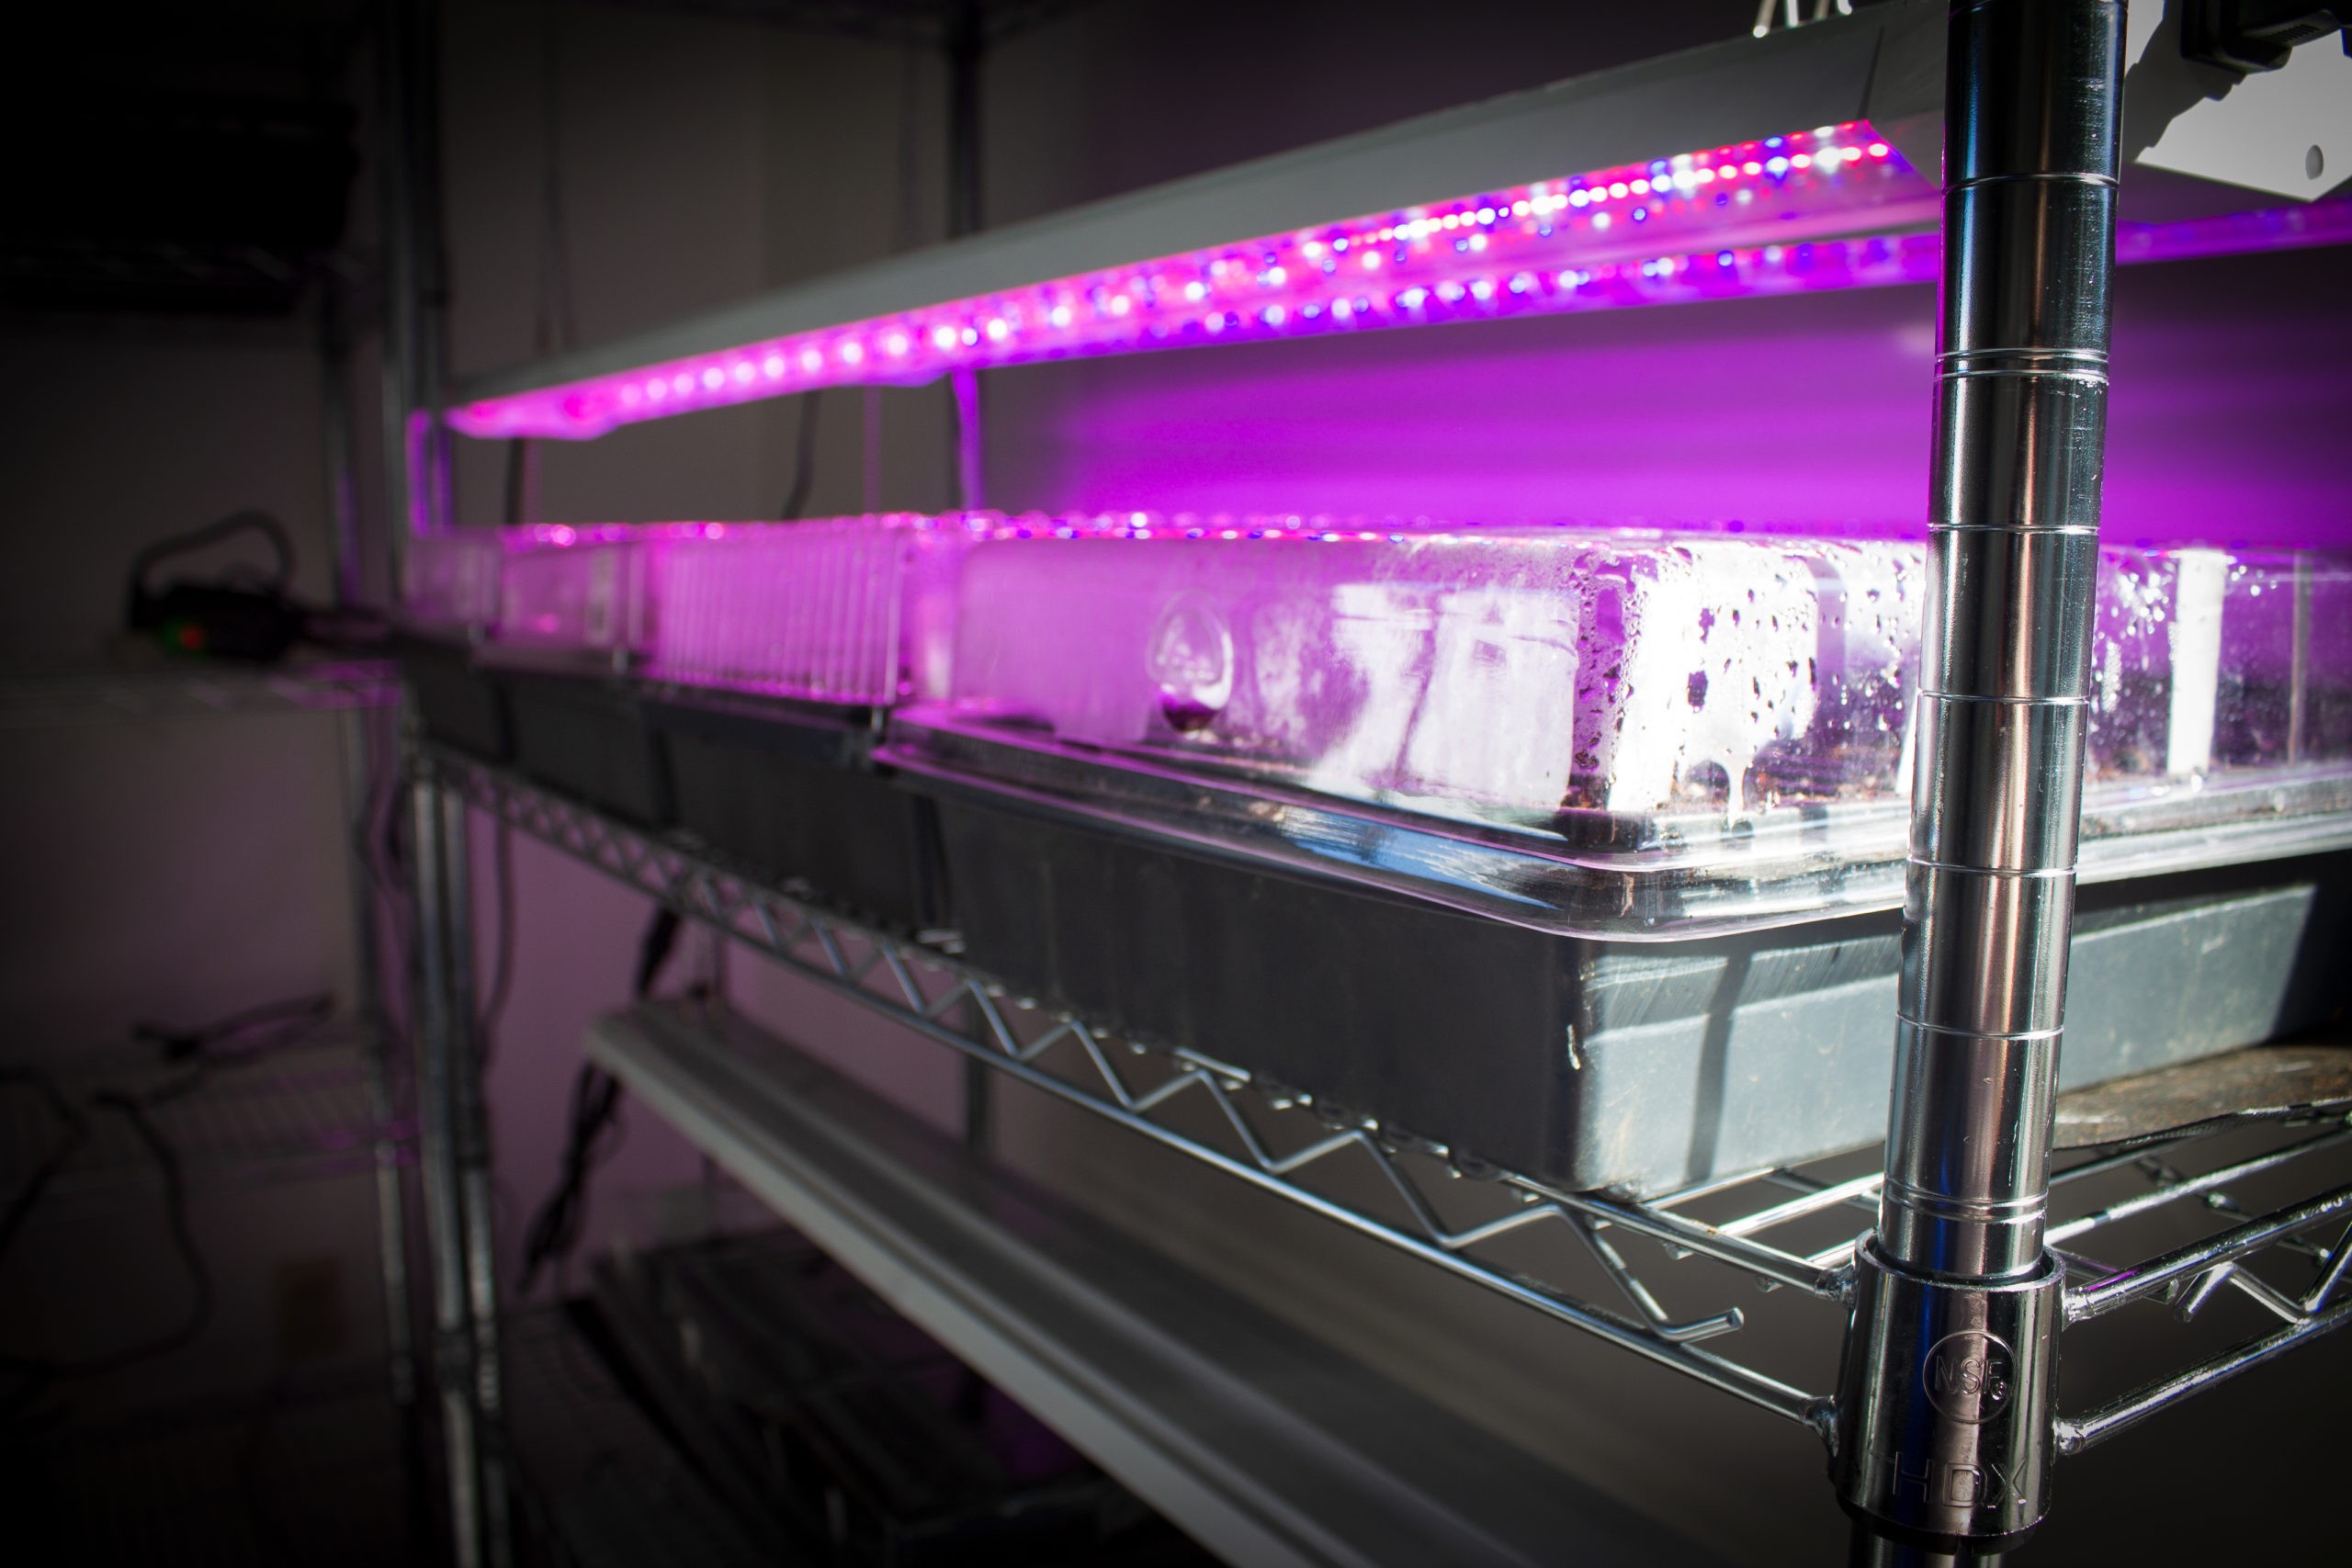 Image shows several black plastic seed starting trays sitting on a wire shelf. They are covered with clear plastic lids and glowing magenta from grow lights hung above them.